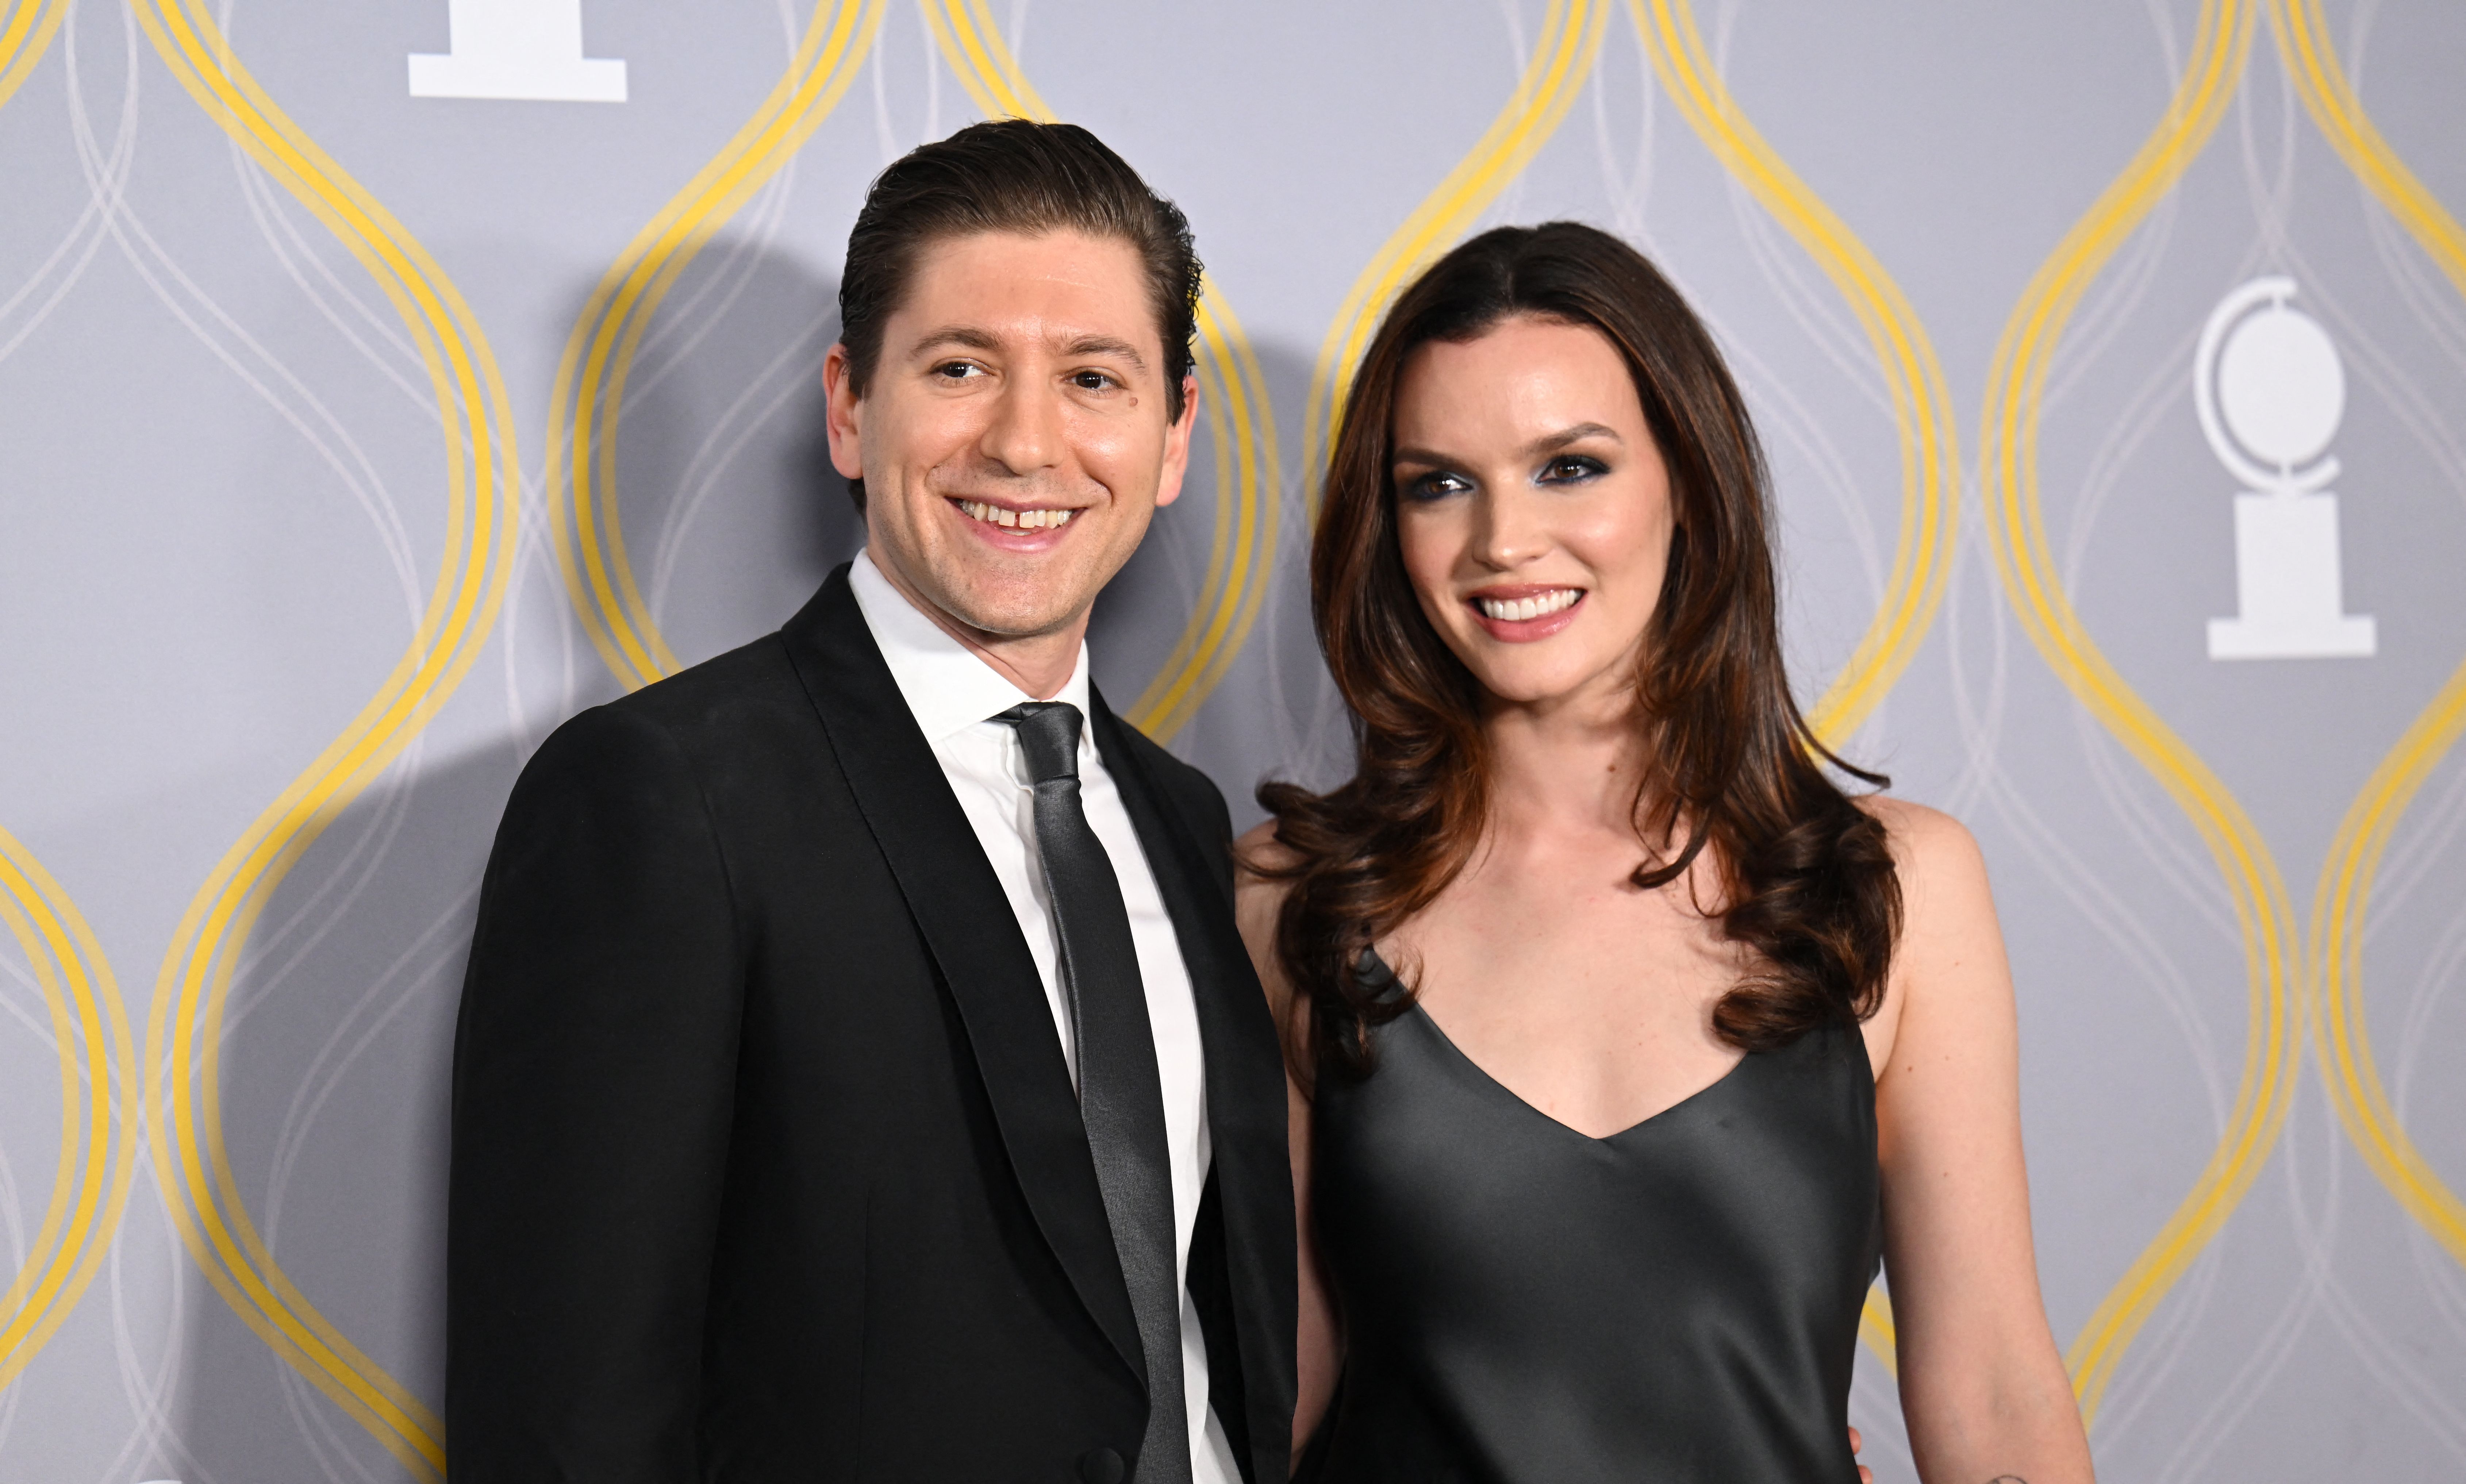 Michael Zegen and Jennifer Damiano attend the 75th annual Tony awards at Radio City Music Hall on June 12, 2022, in New York City. | Source: Getty Images